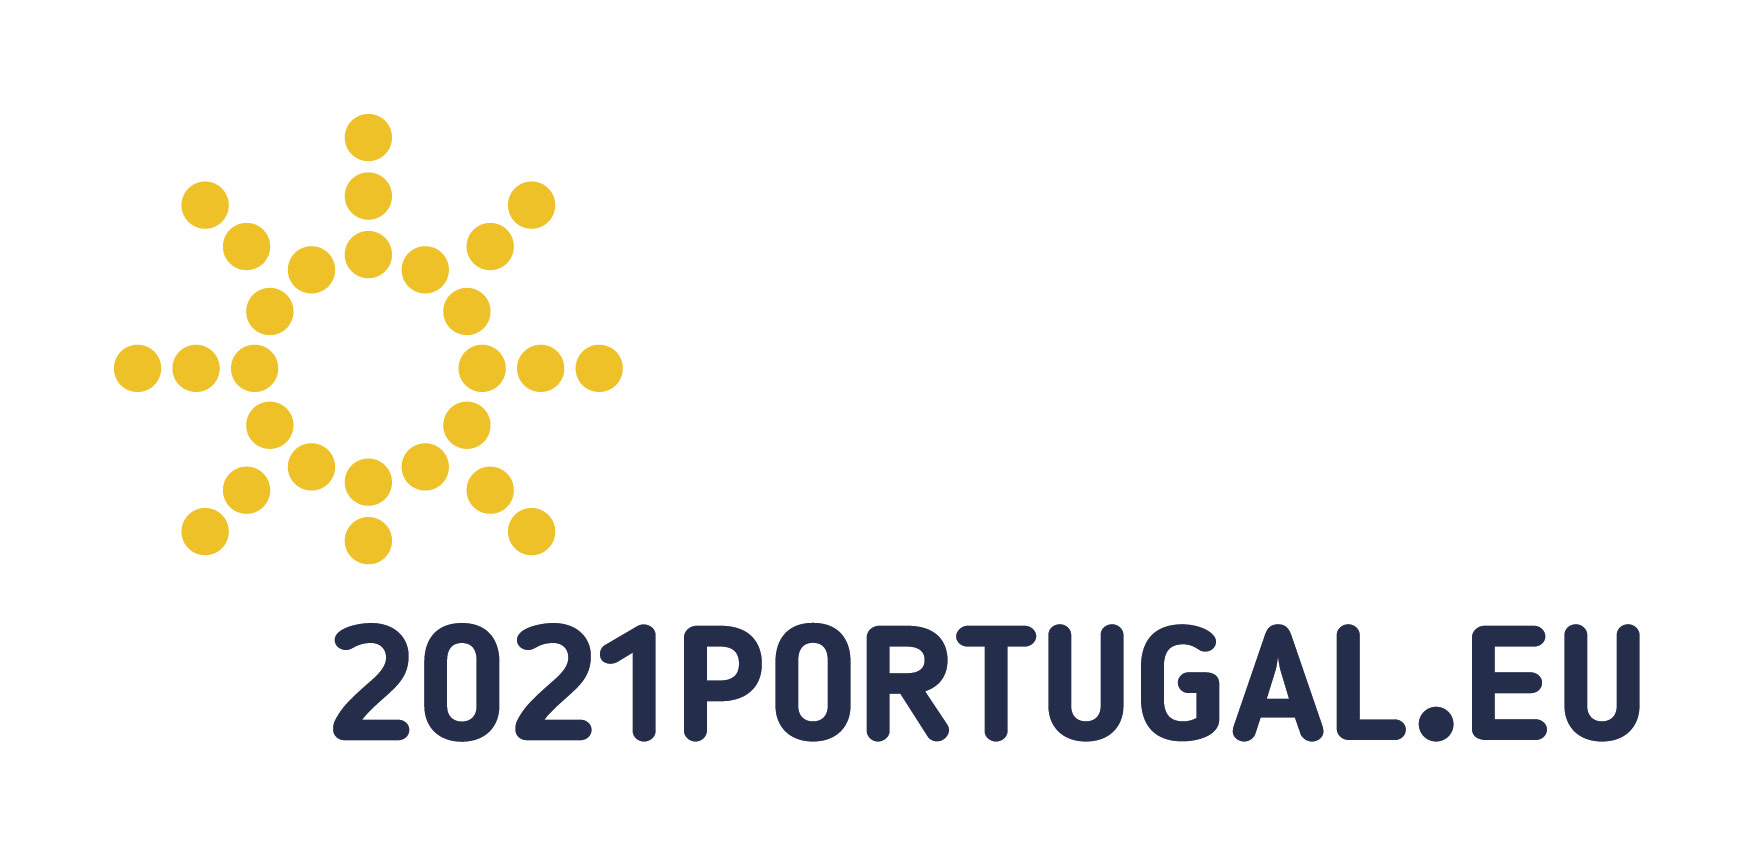 Portugal holds the Presidency of the Council of the European Union